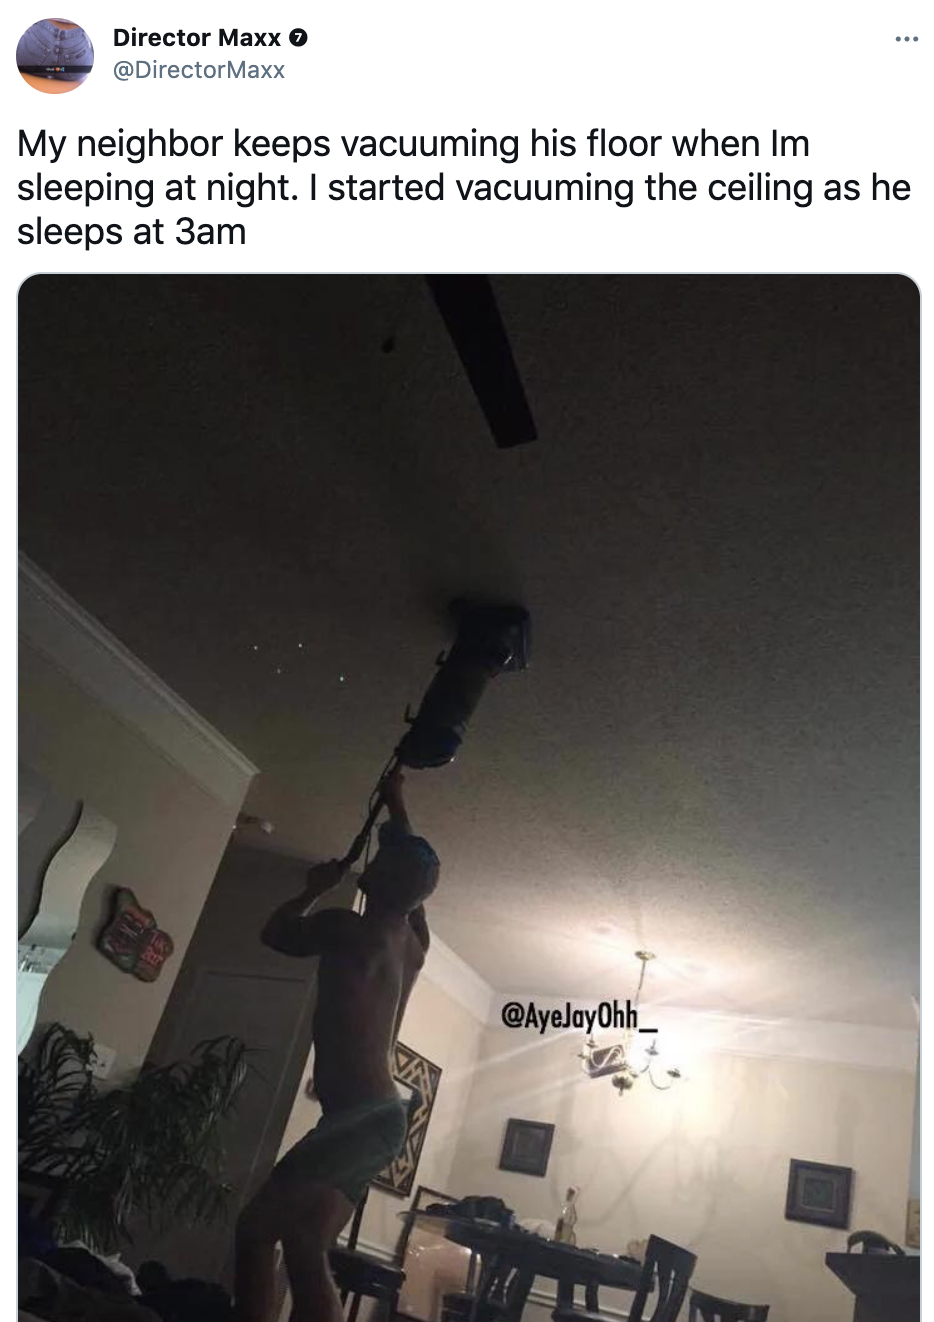 A tweet about a person vacuuming the ceiling to bother their neighbor